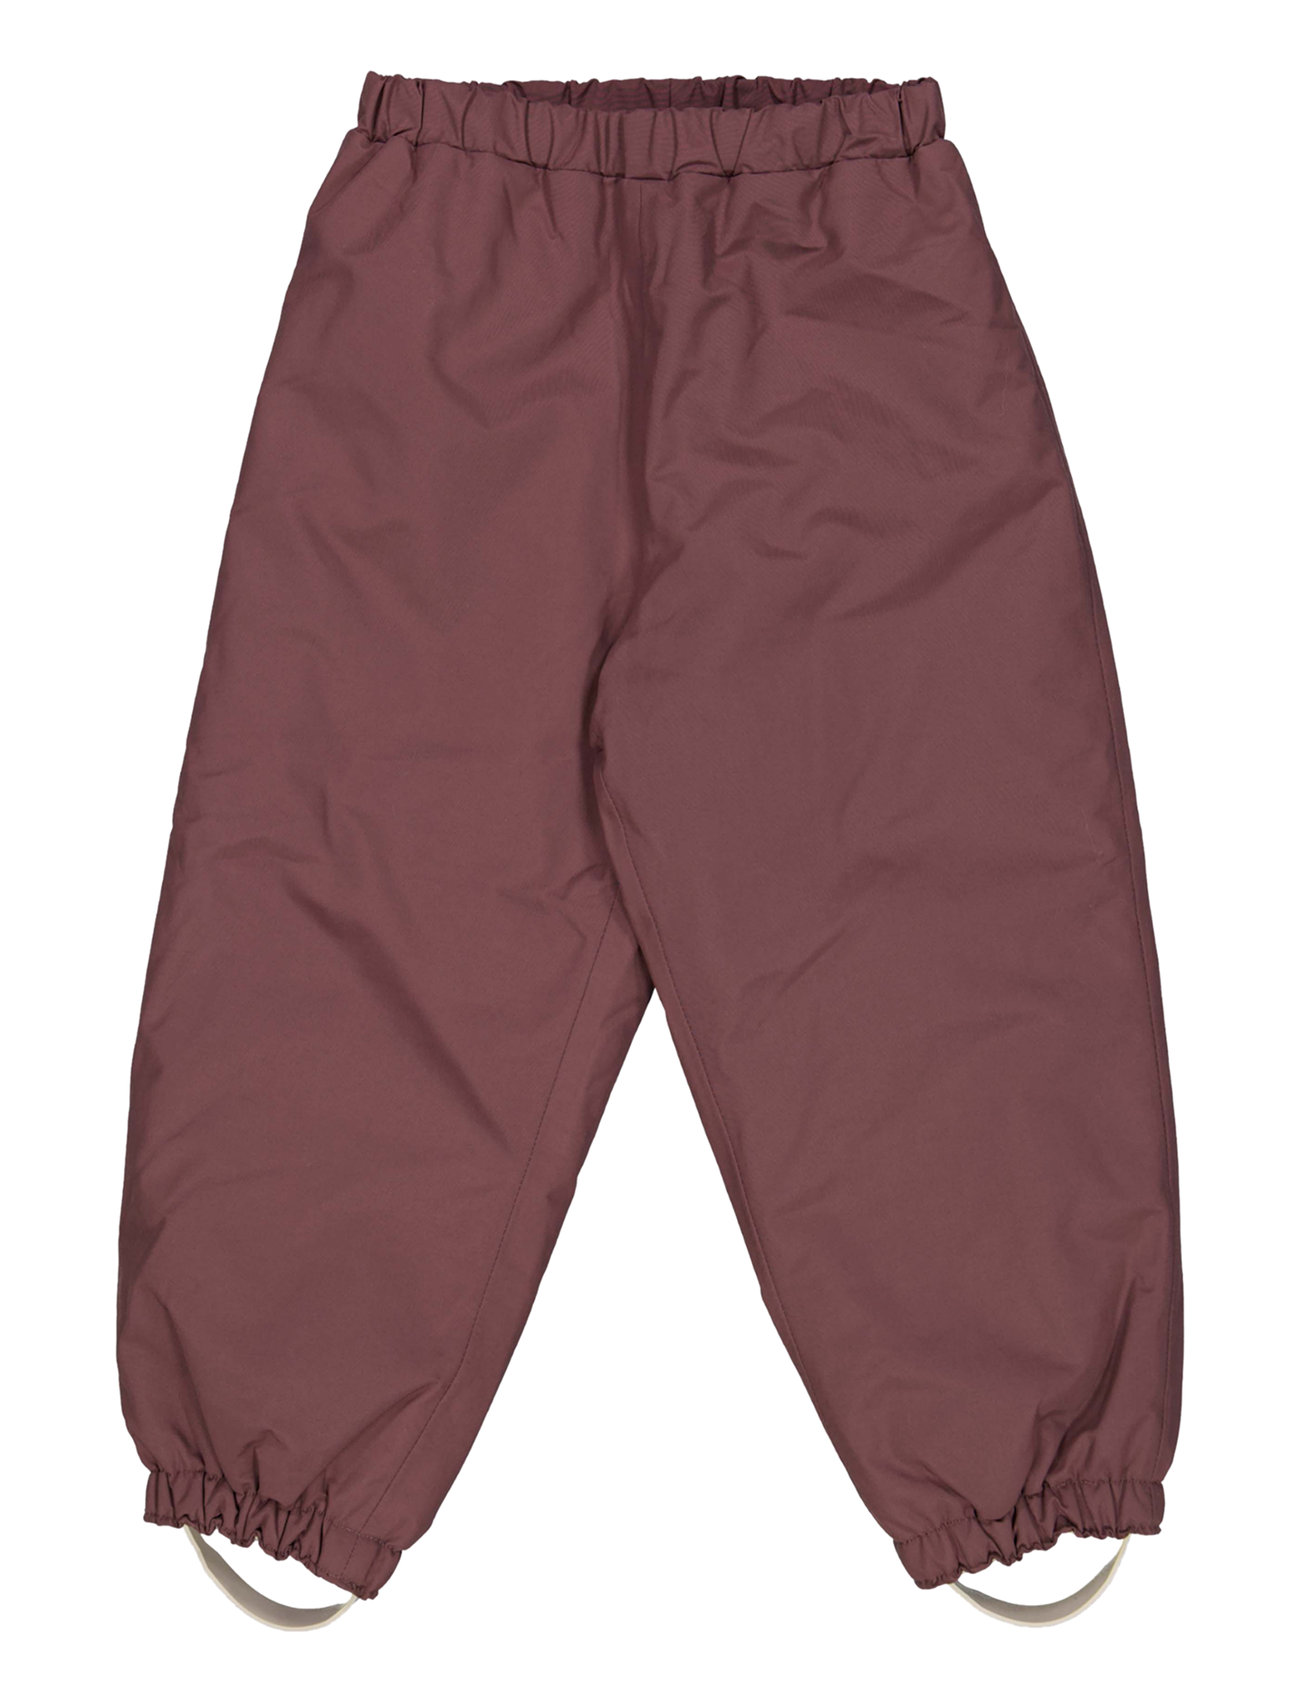 Afbrydelse Prisnedsættelse Yoghurt Wheat Ski Pants Jay Tech - 41.97 €. Buy Winter trousers from Wheat online  at Boozt.com. Fast delivery and easy returns